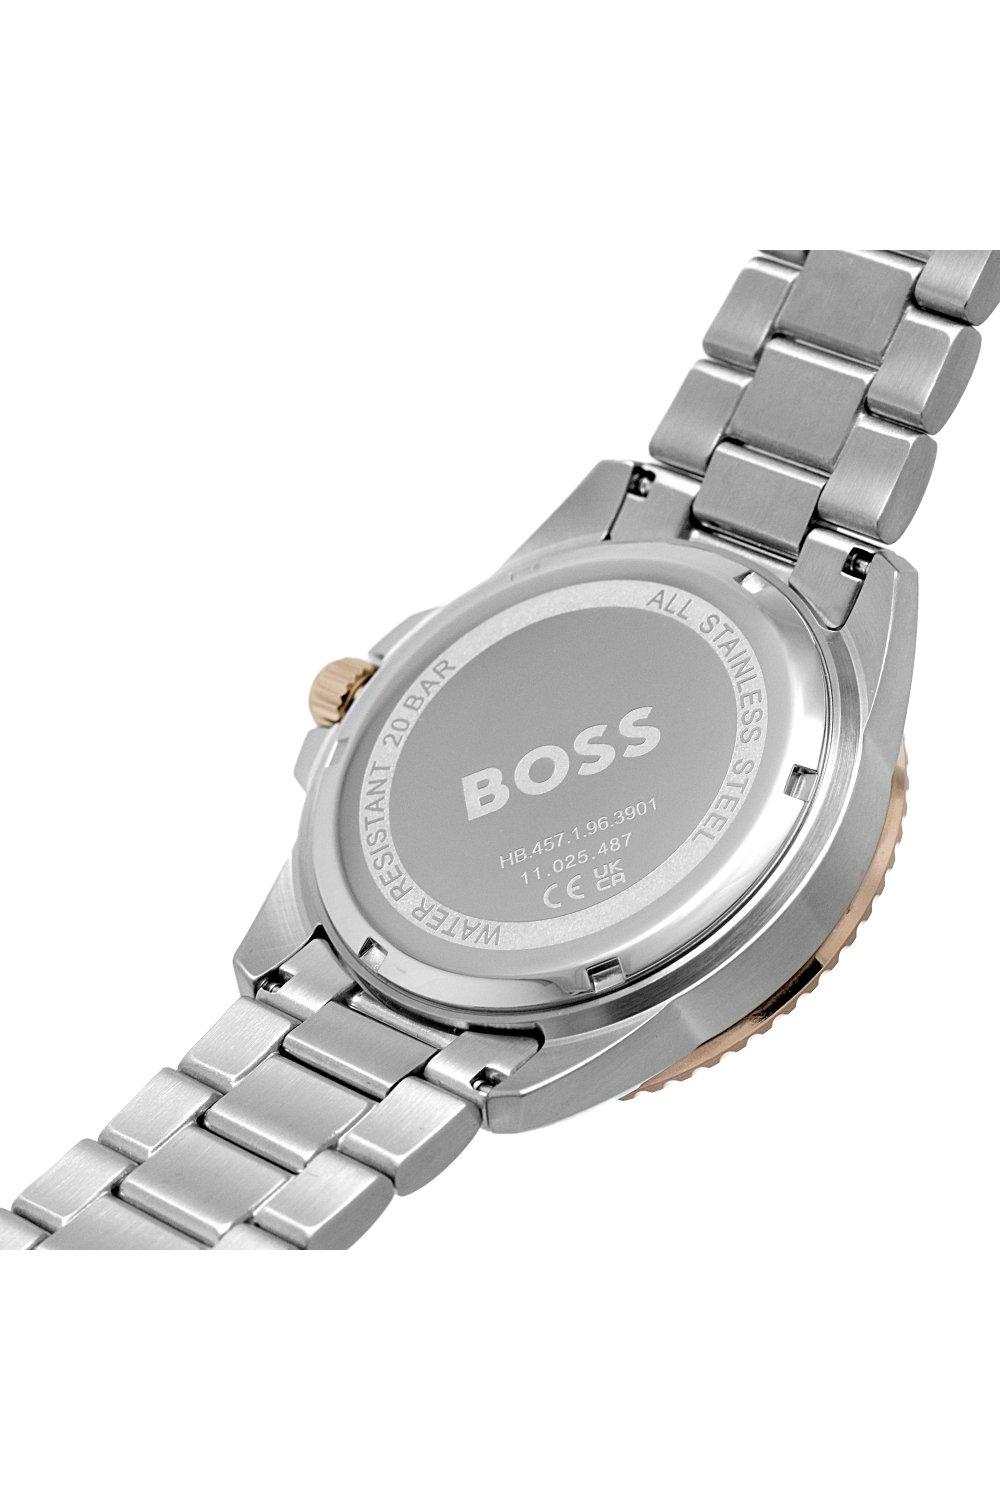 Watch Ace Fashion 1514012 Watches Quartz Steel Analogue BOSS | - Stainless |